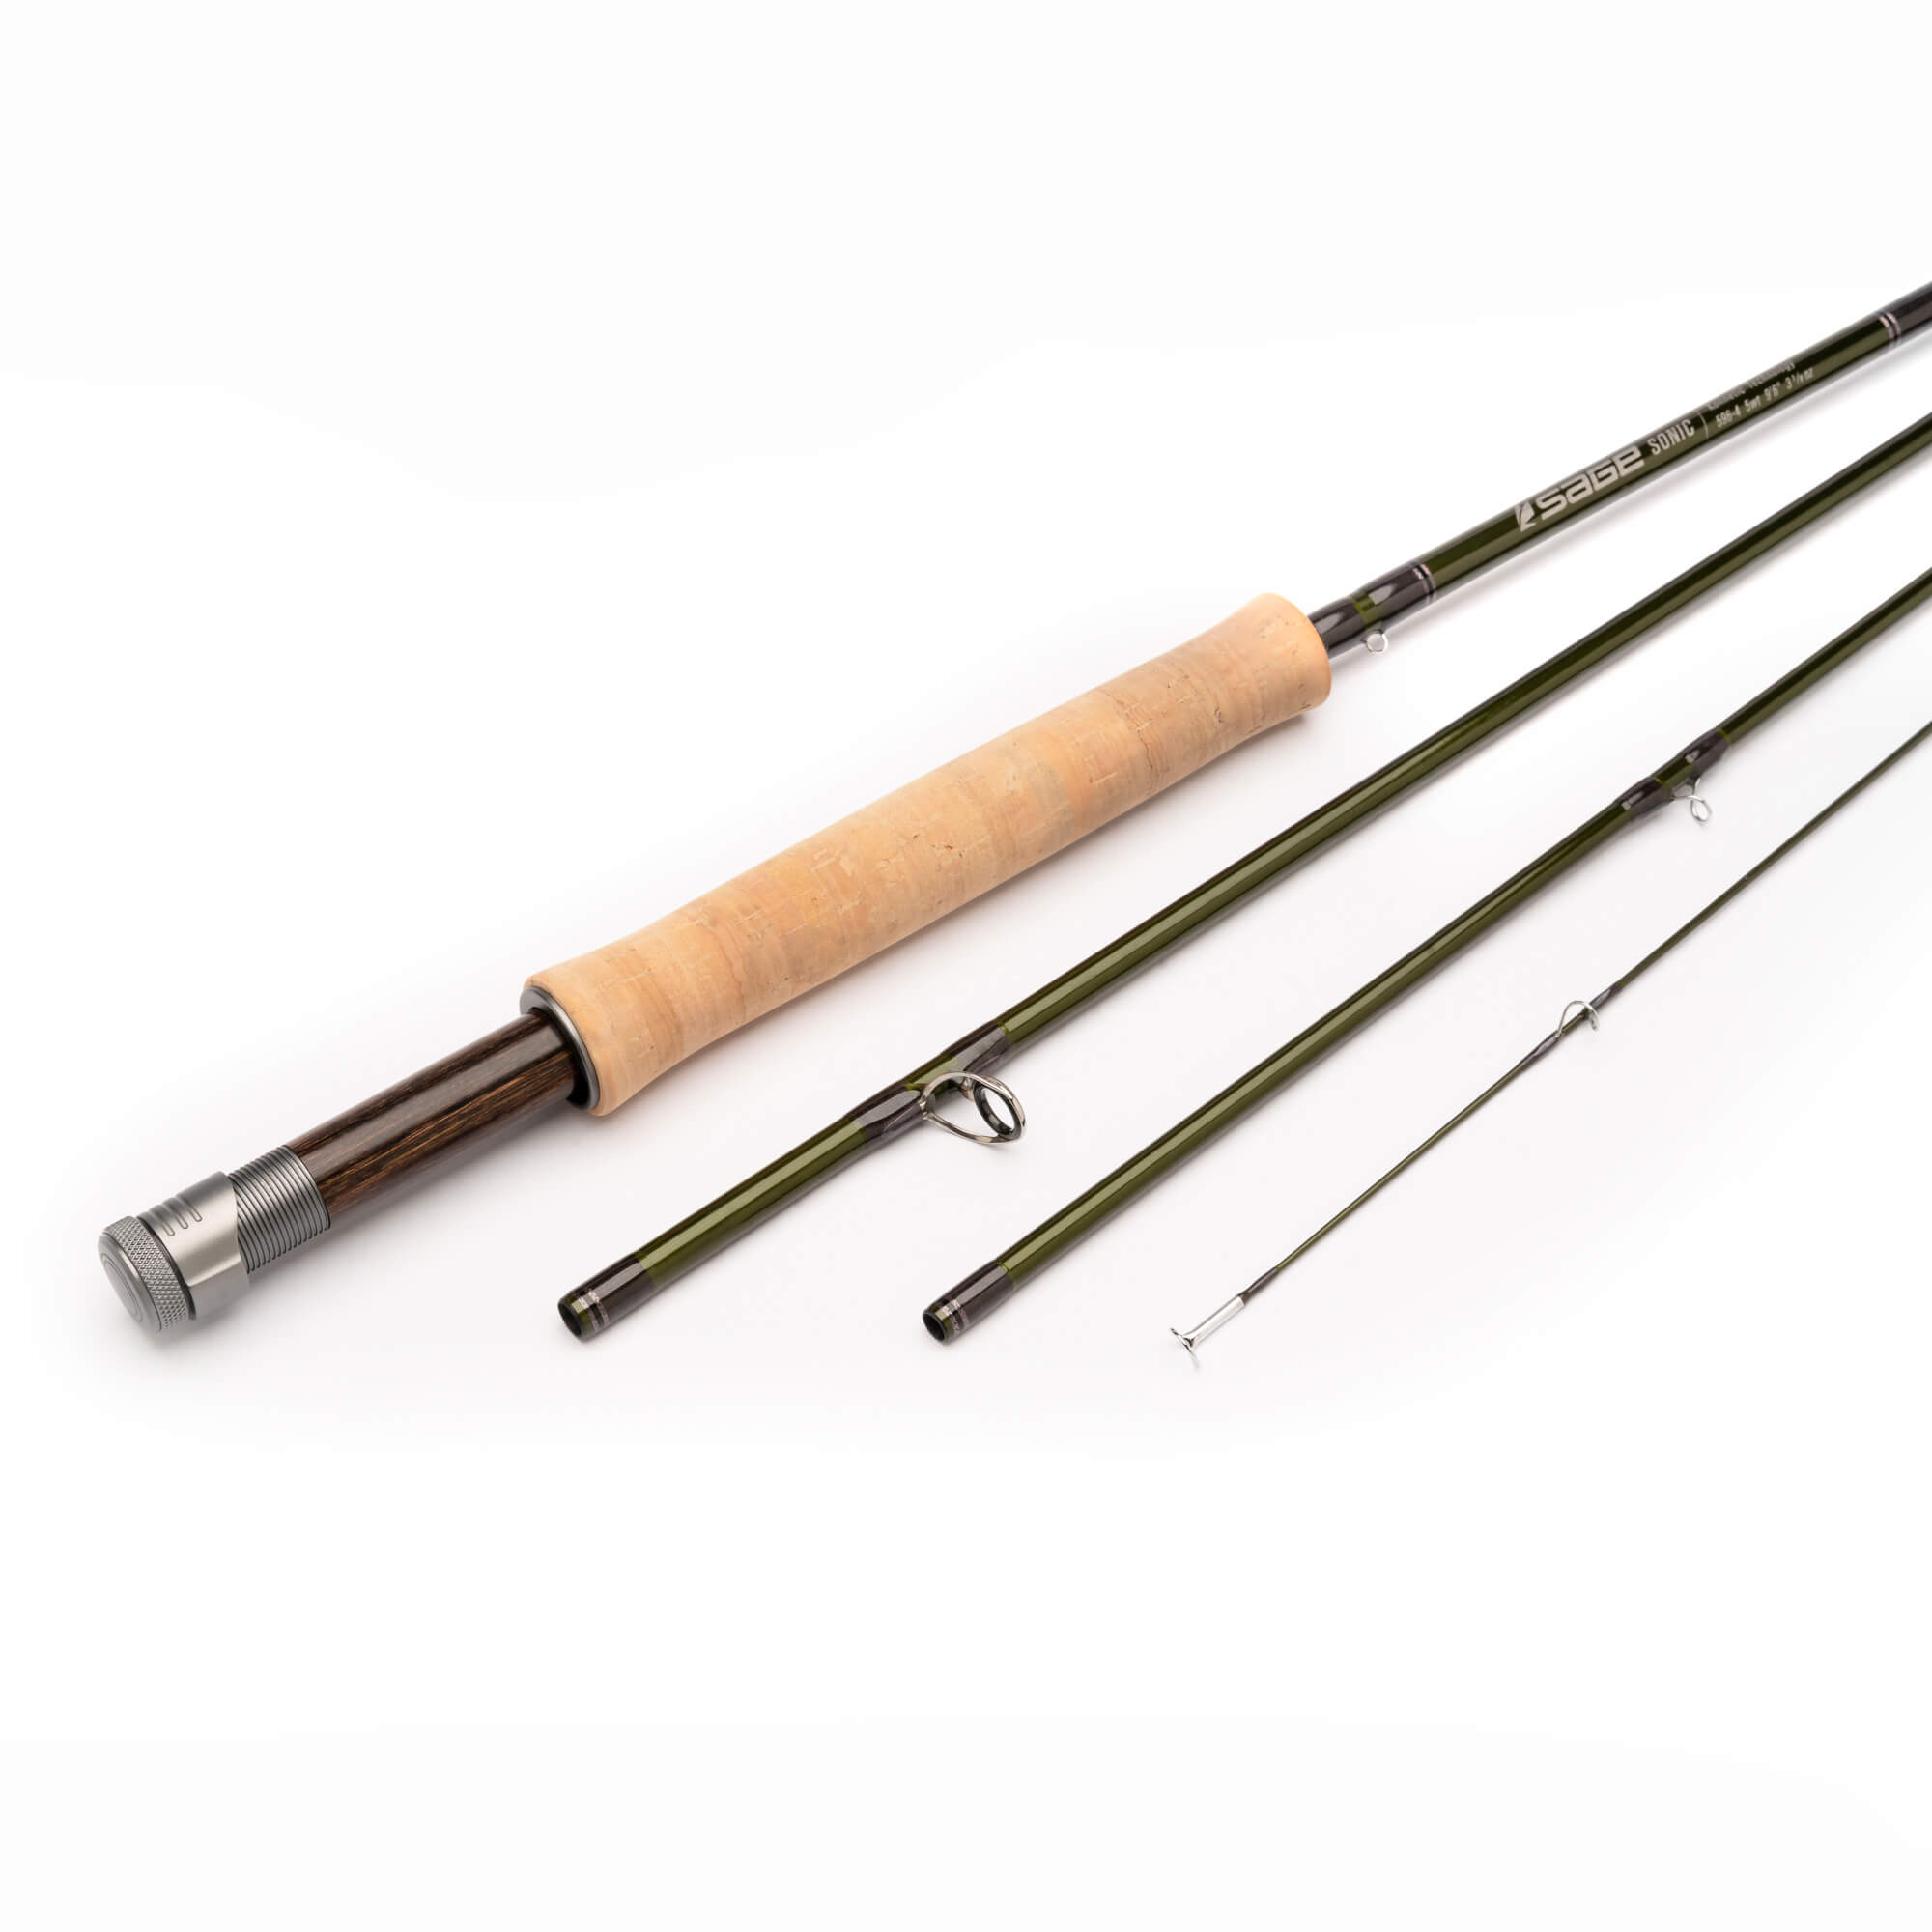 Sage Sonic Fly Rod – Guide Flyfishing, Fly Fishing Rods, Reels, Sage, Redington, RIO